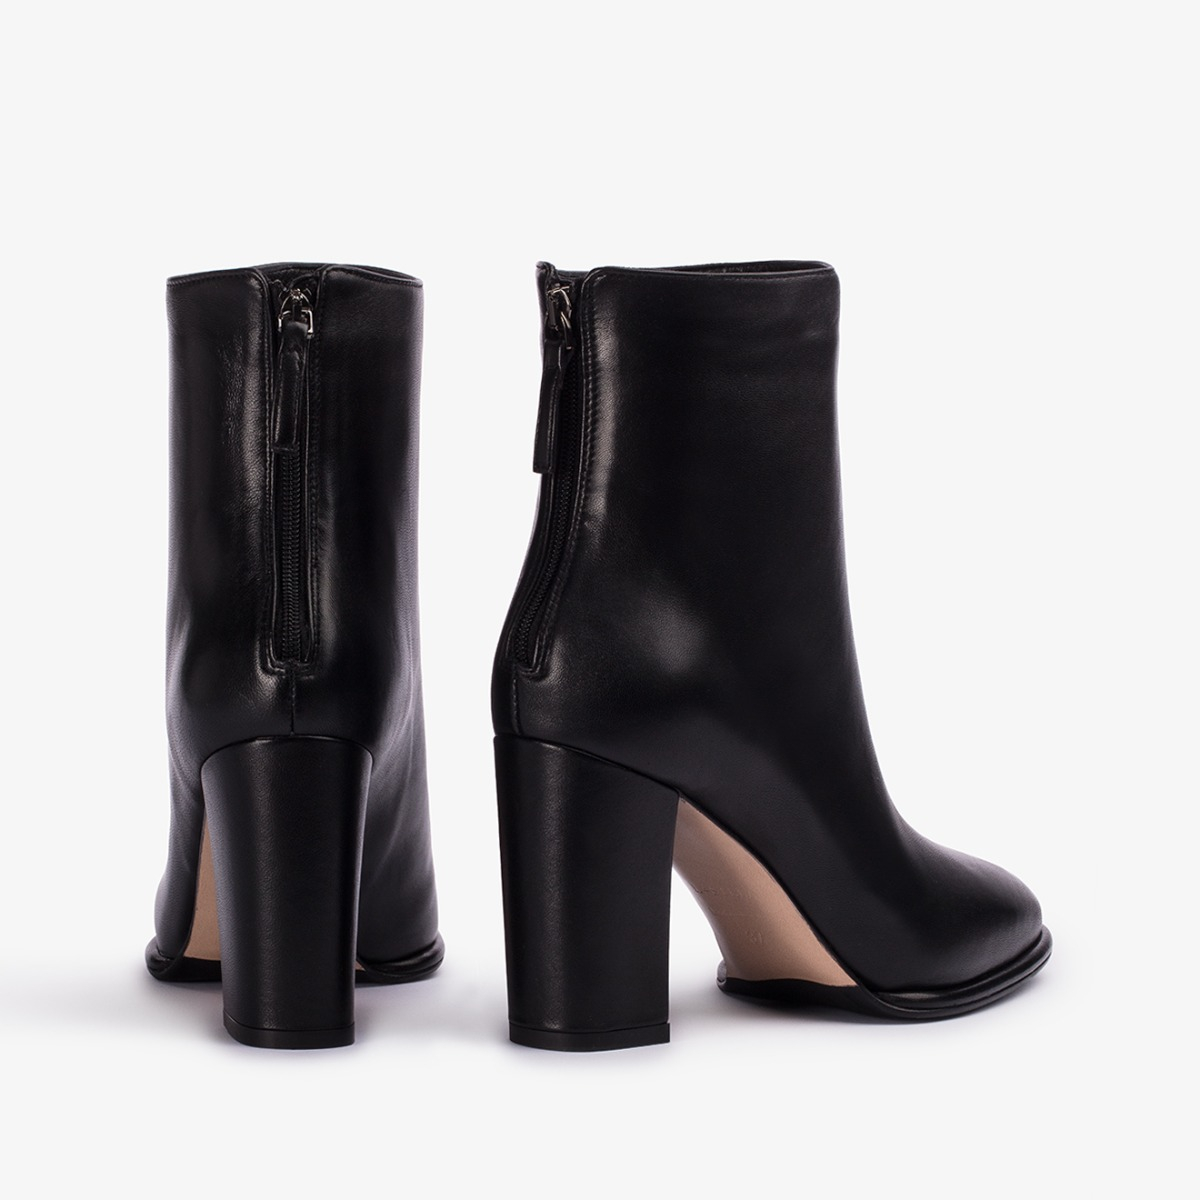 ELSA ANKLE BOOT 90 mm - Le Silla | Official Online Store